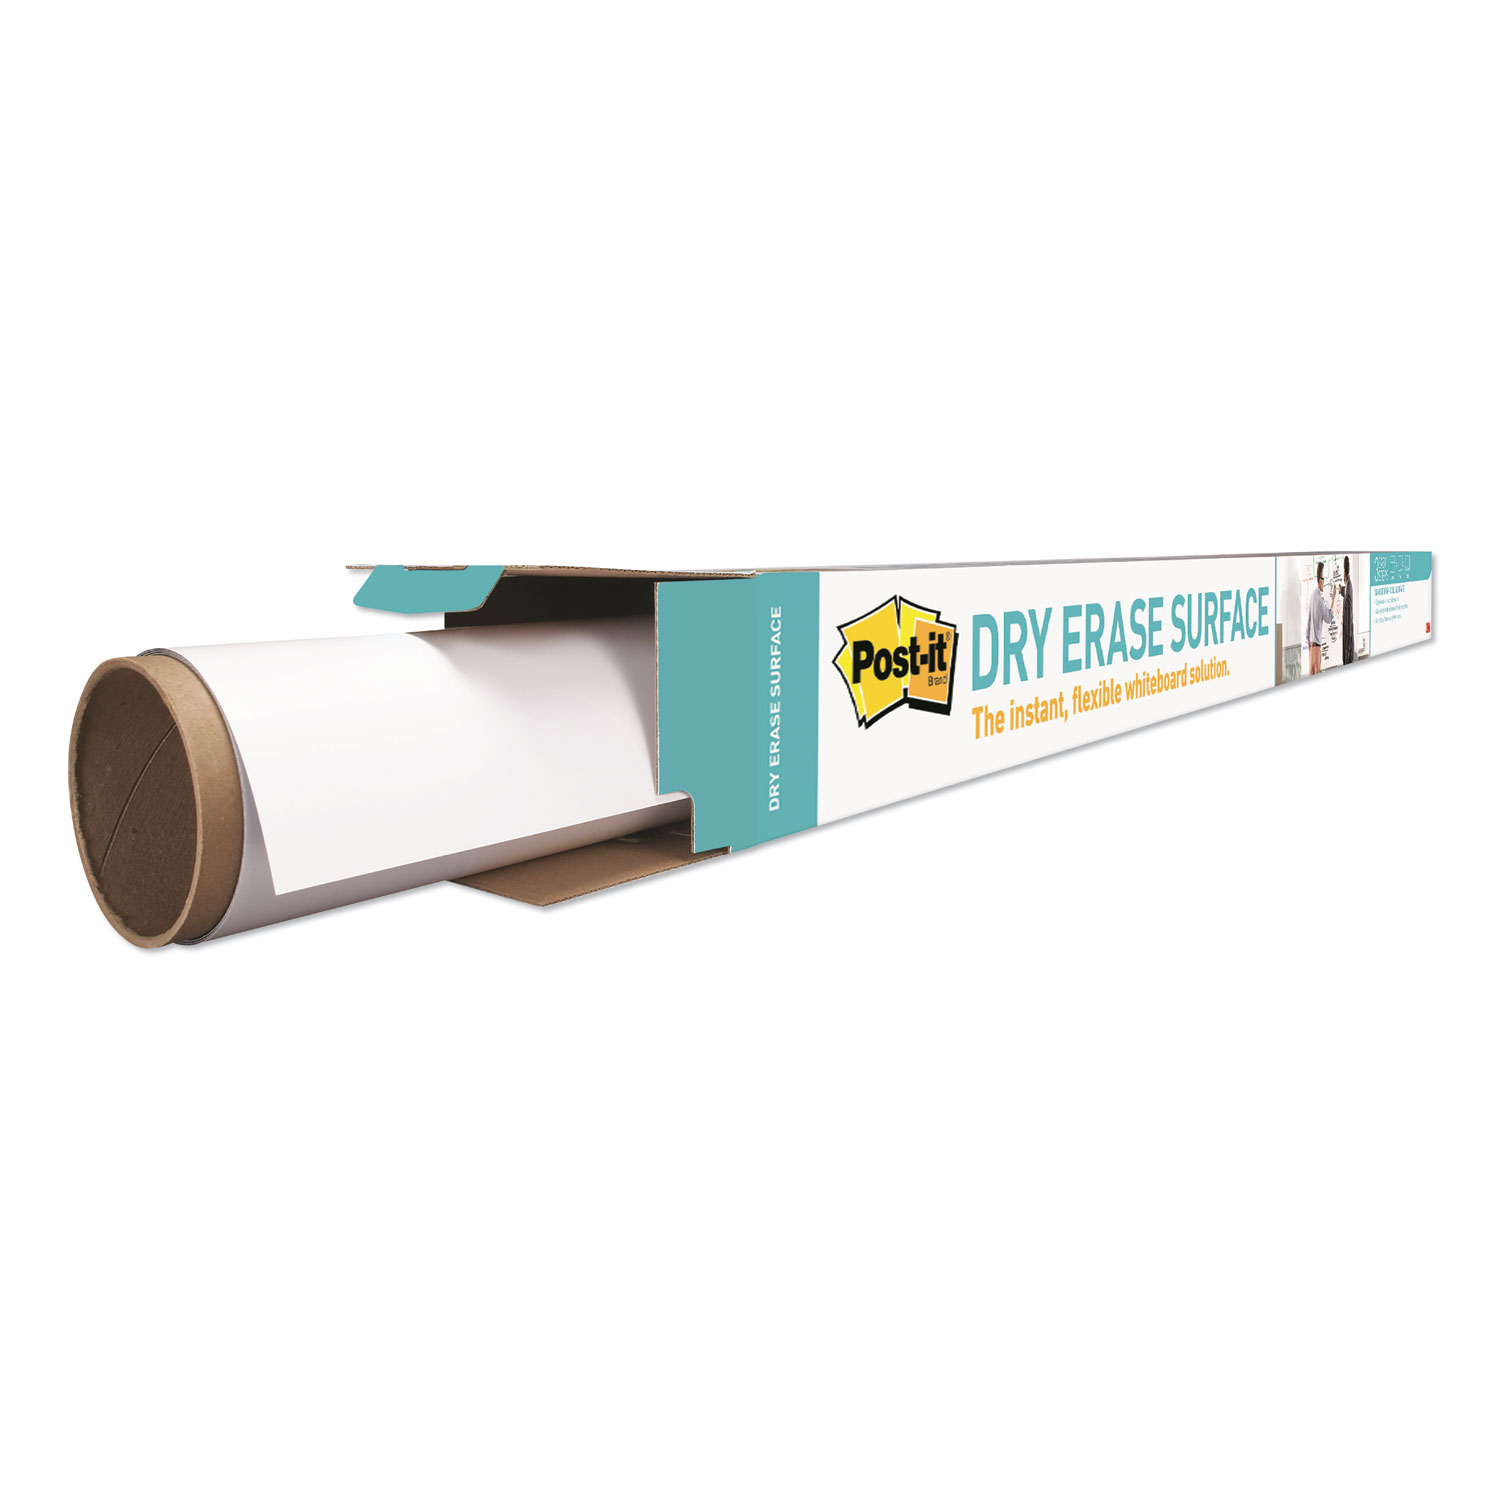  Post-it DEF6X4 Dry Erase Surface with Adhesive Backing, 72 x 48, White (MMMDEF6X4) 